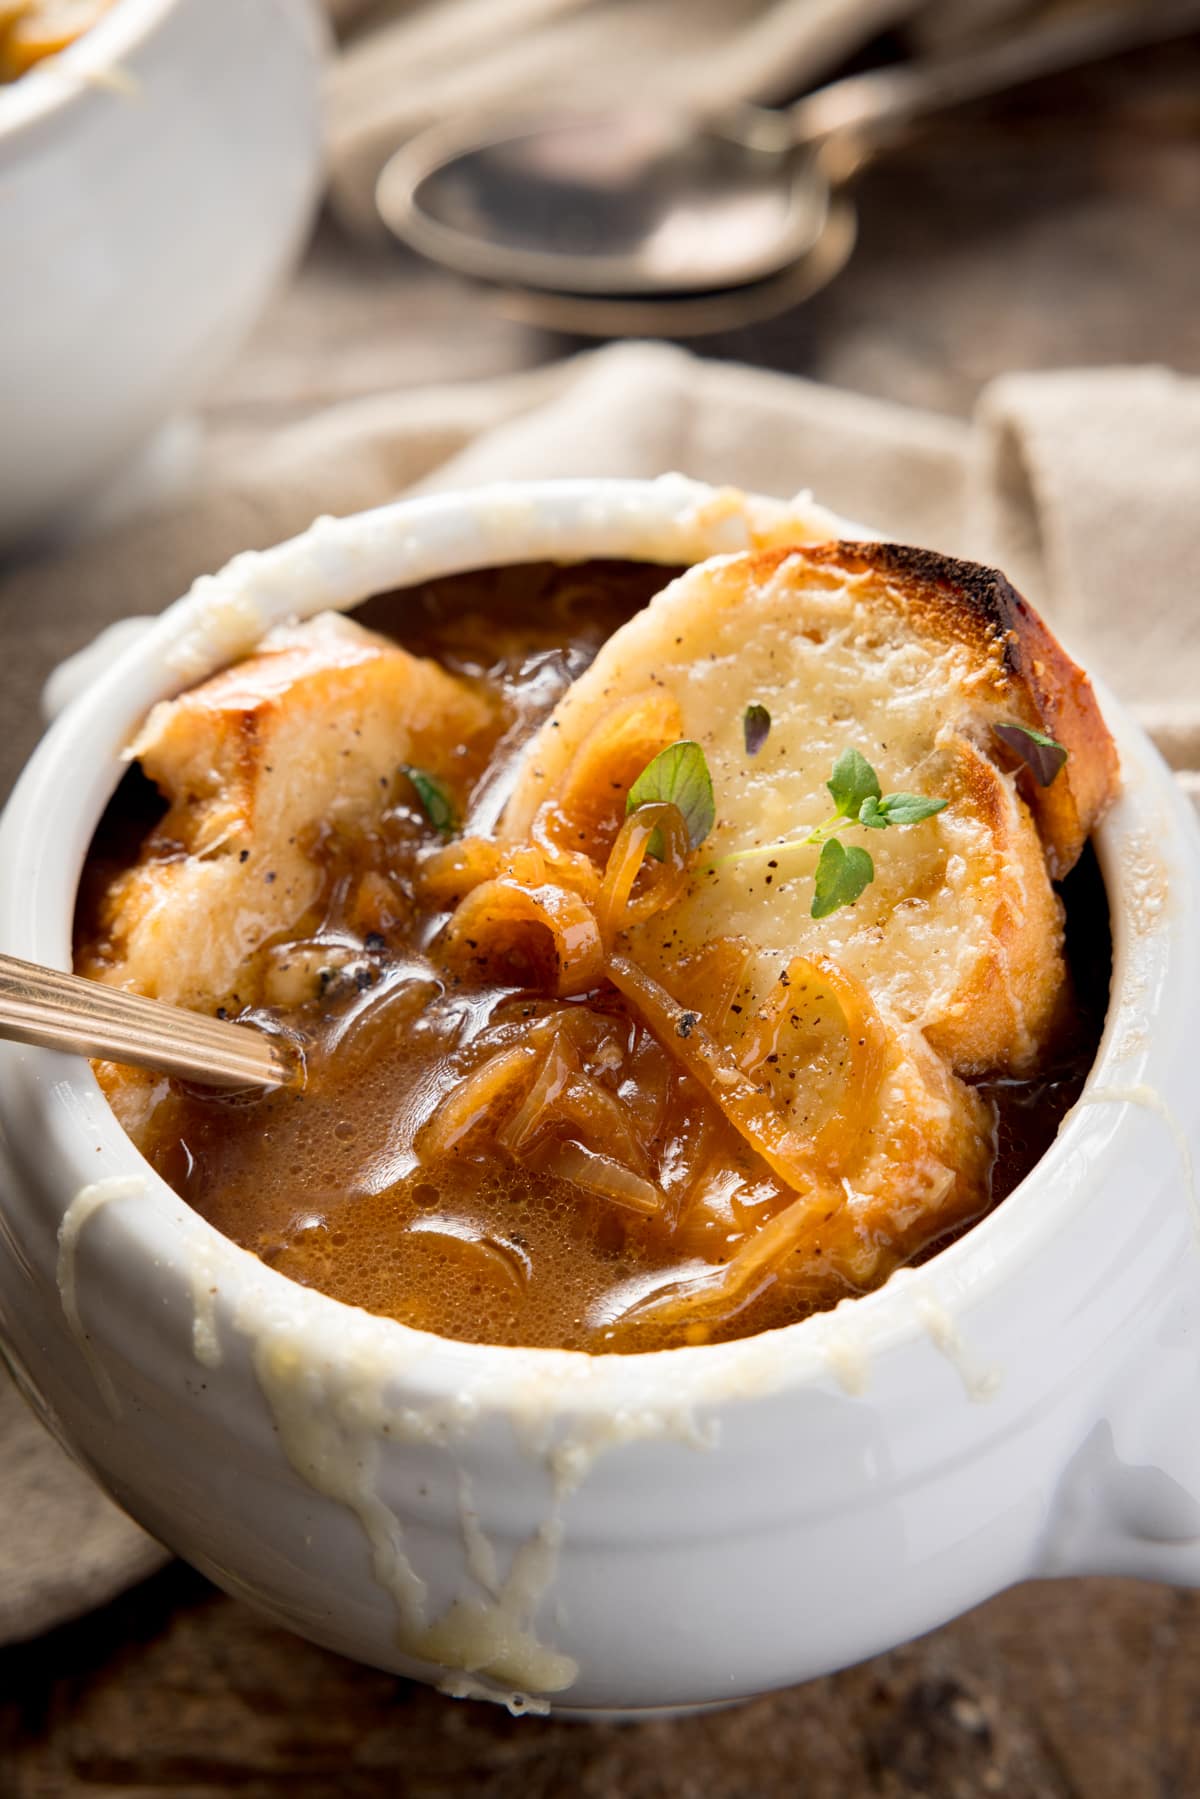 Close-up of French Onion Soup in a white bowl on a wooden table next to a beige napkin. There is a gold spoon sticking out of the bowl. There is a further bowl and two spoons just in shot at the top of the image.